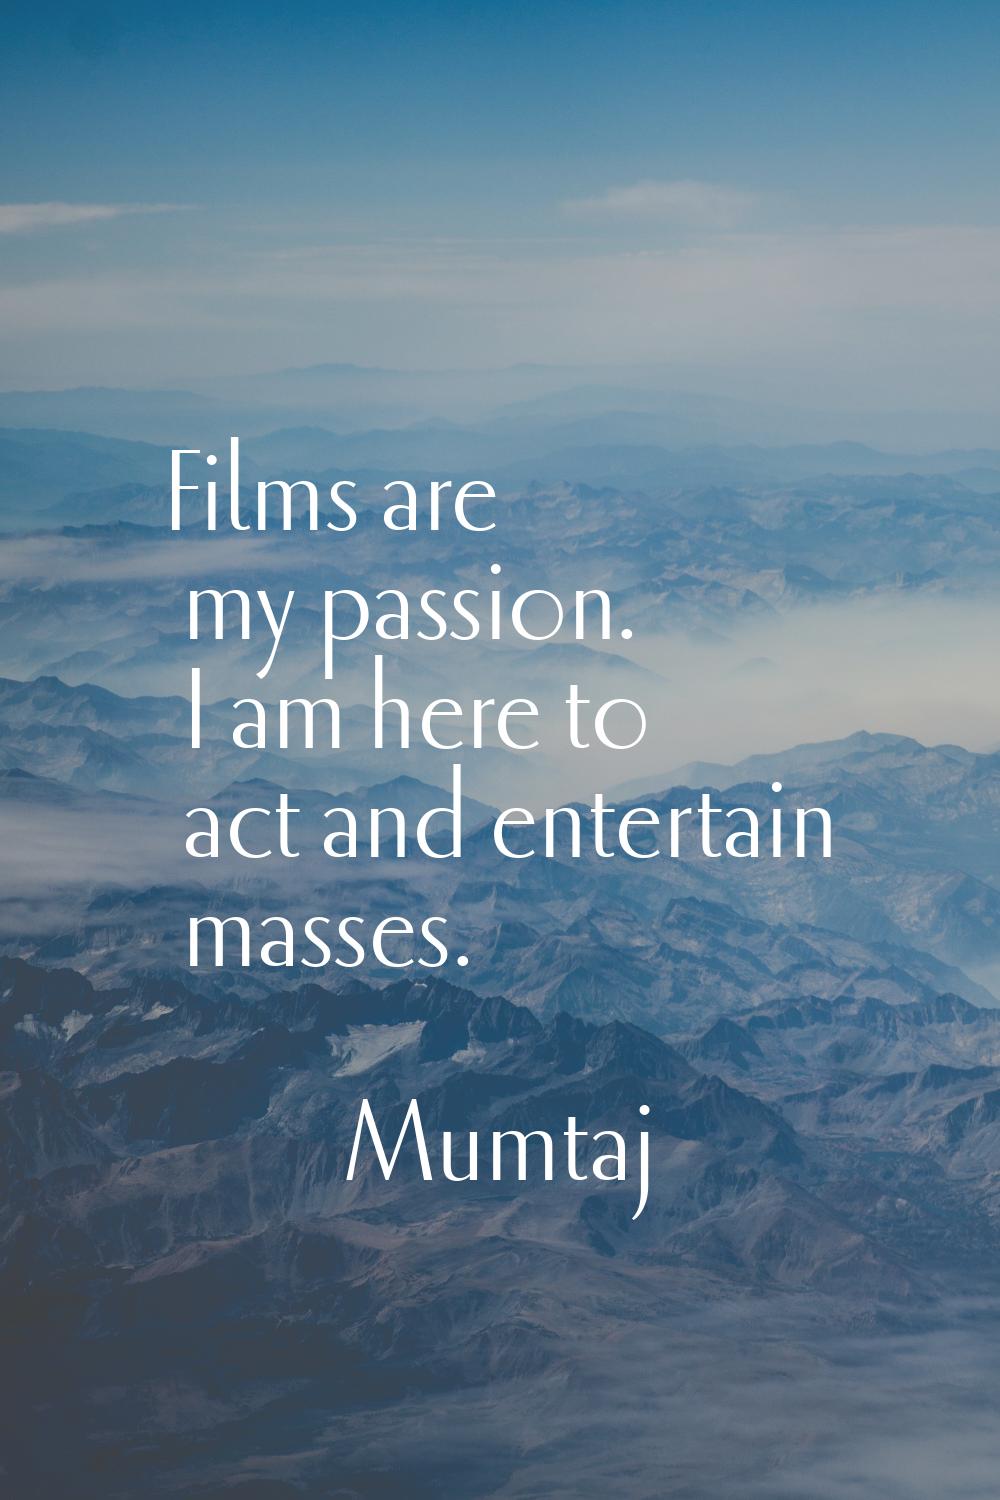 Films are my passion. I am here to act and entertain masses.